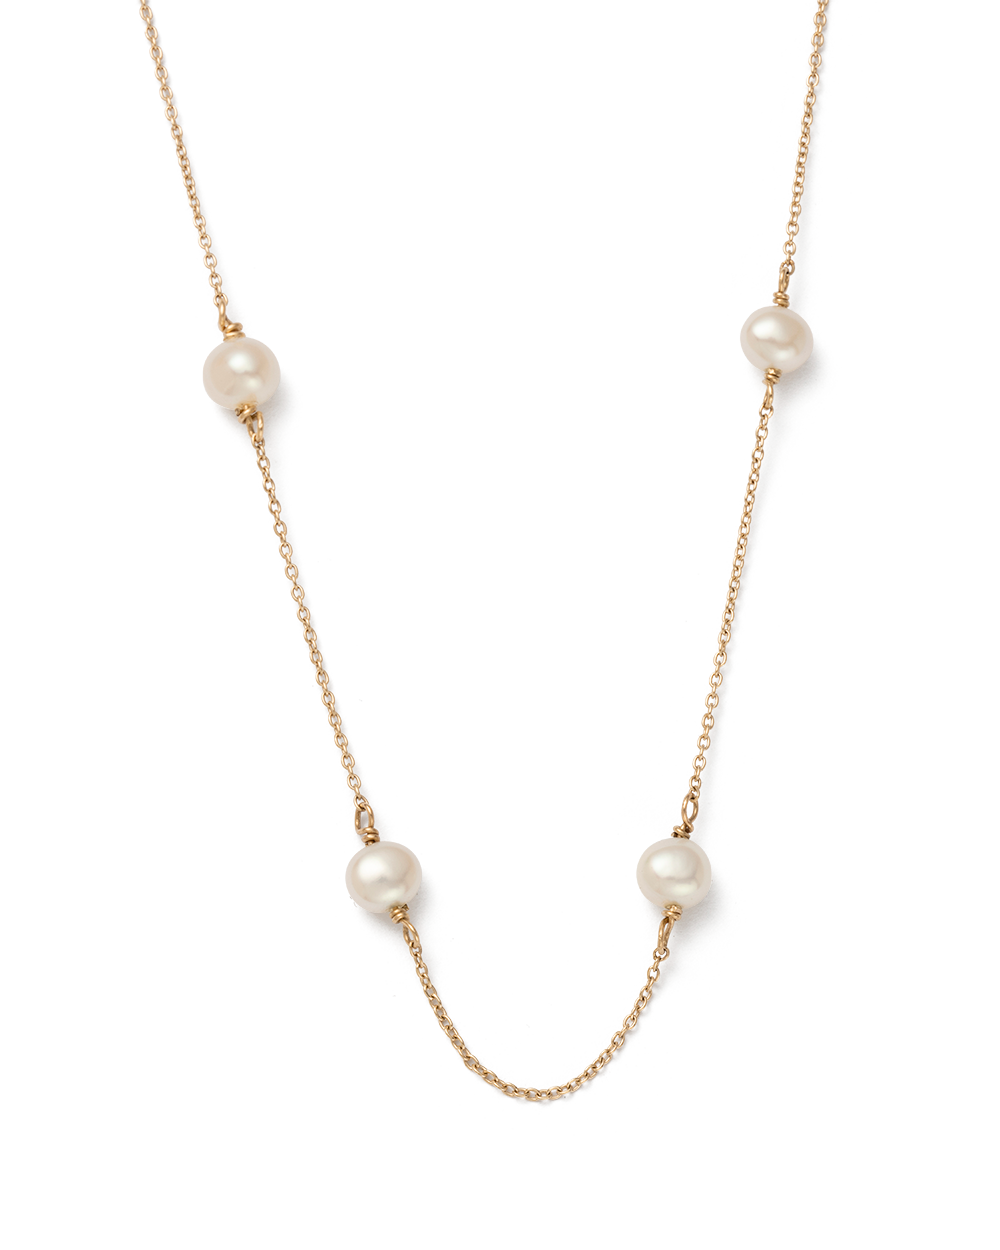 MOON TIDE PEARL NECKLACE (9K GOLD) - IMAGE 1